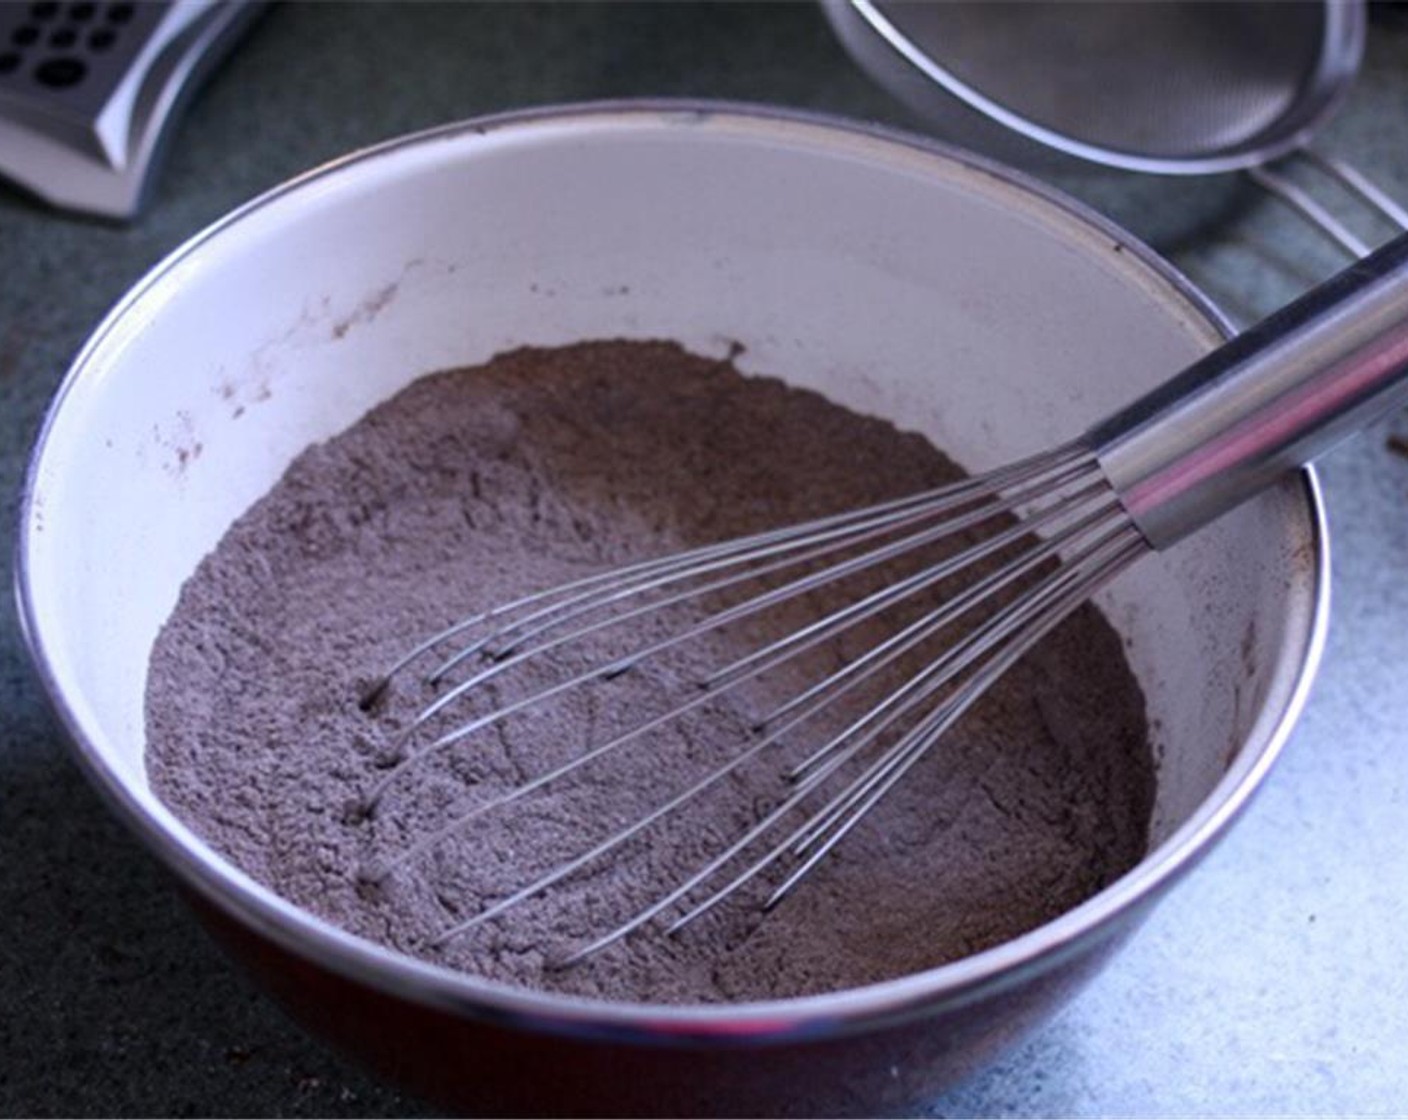 step 3 Sift the All-Purpose Flour (1 cup), Dutch Processed Cocoa Powder (3/4 cup), Granulated Sugar (1 1/2 cups), Baking Powder (3/4 tsp) and Salt (3/4 tsp) together into a medium bowl. Whisk well to combine and set aside.